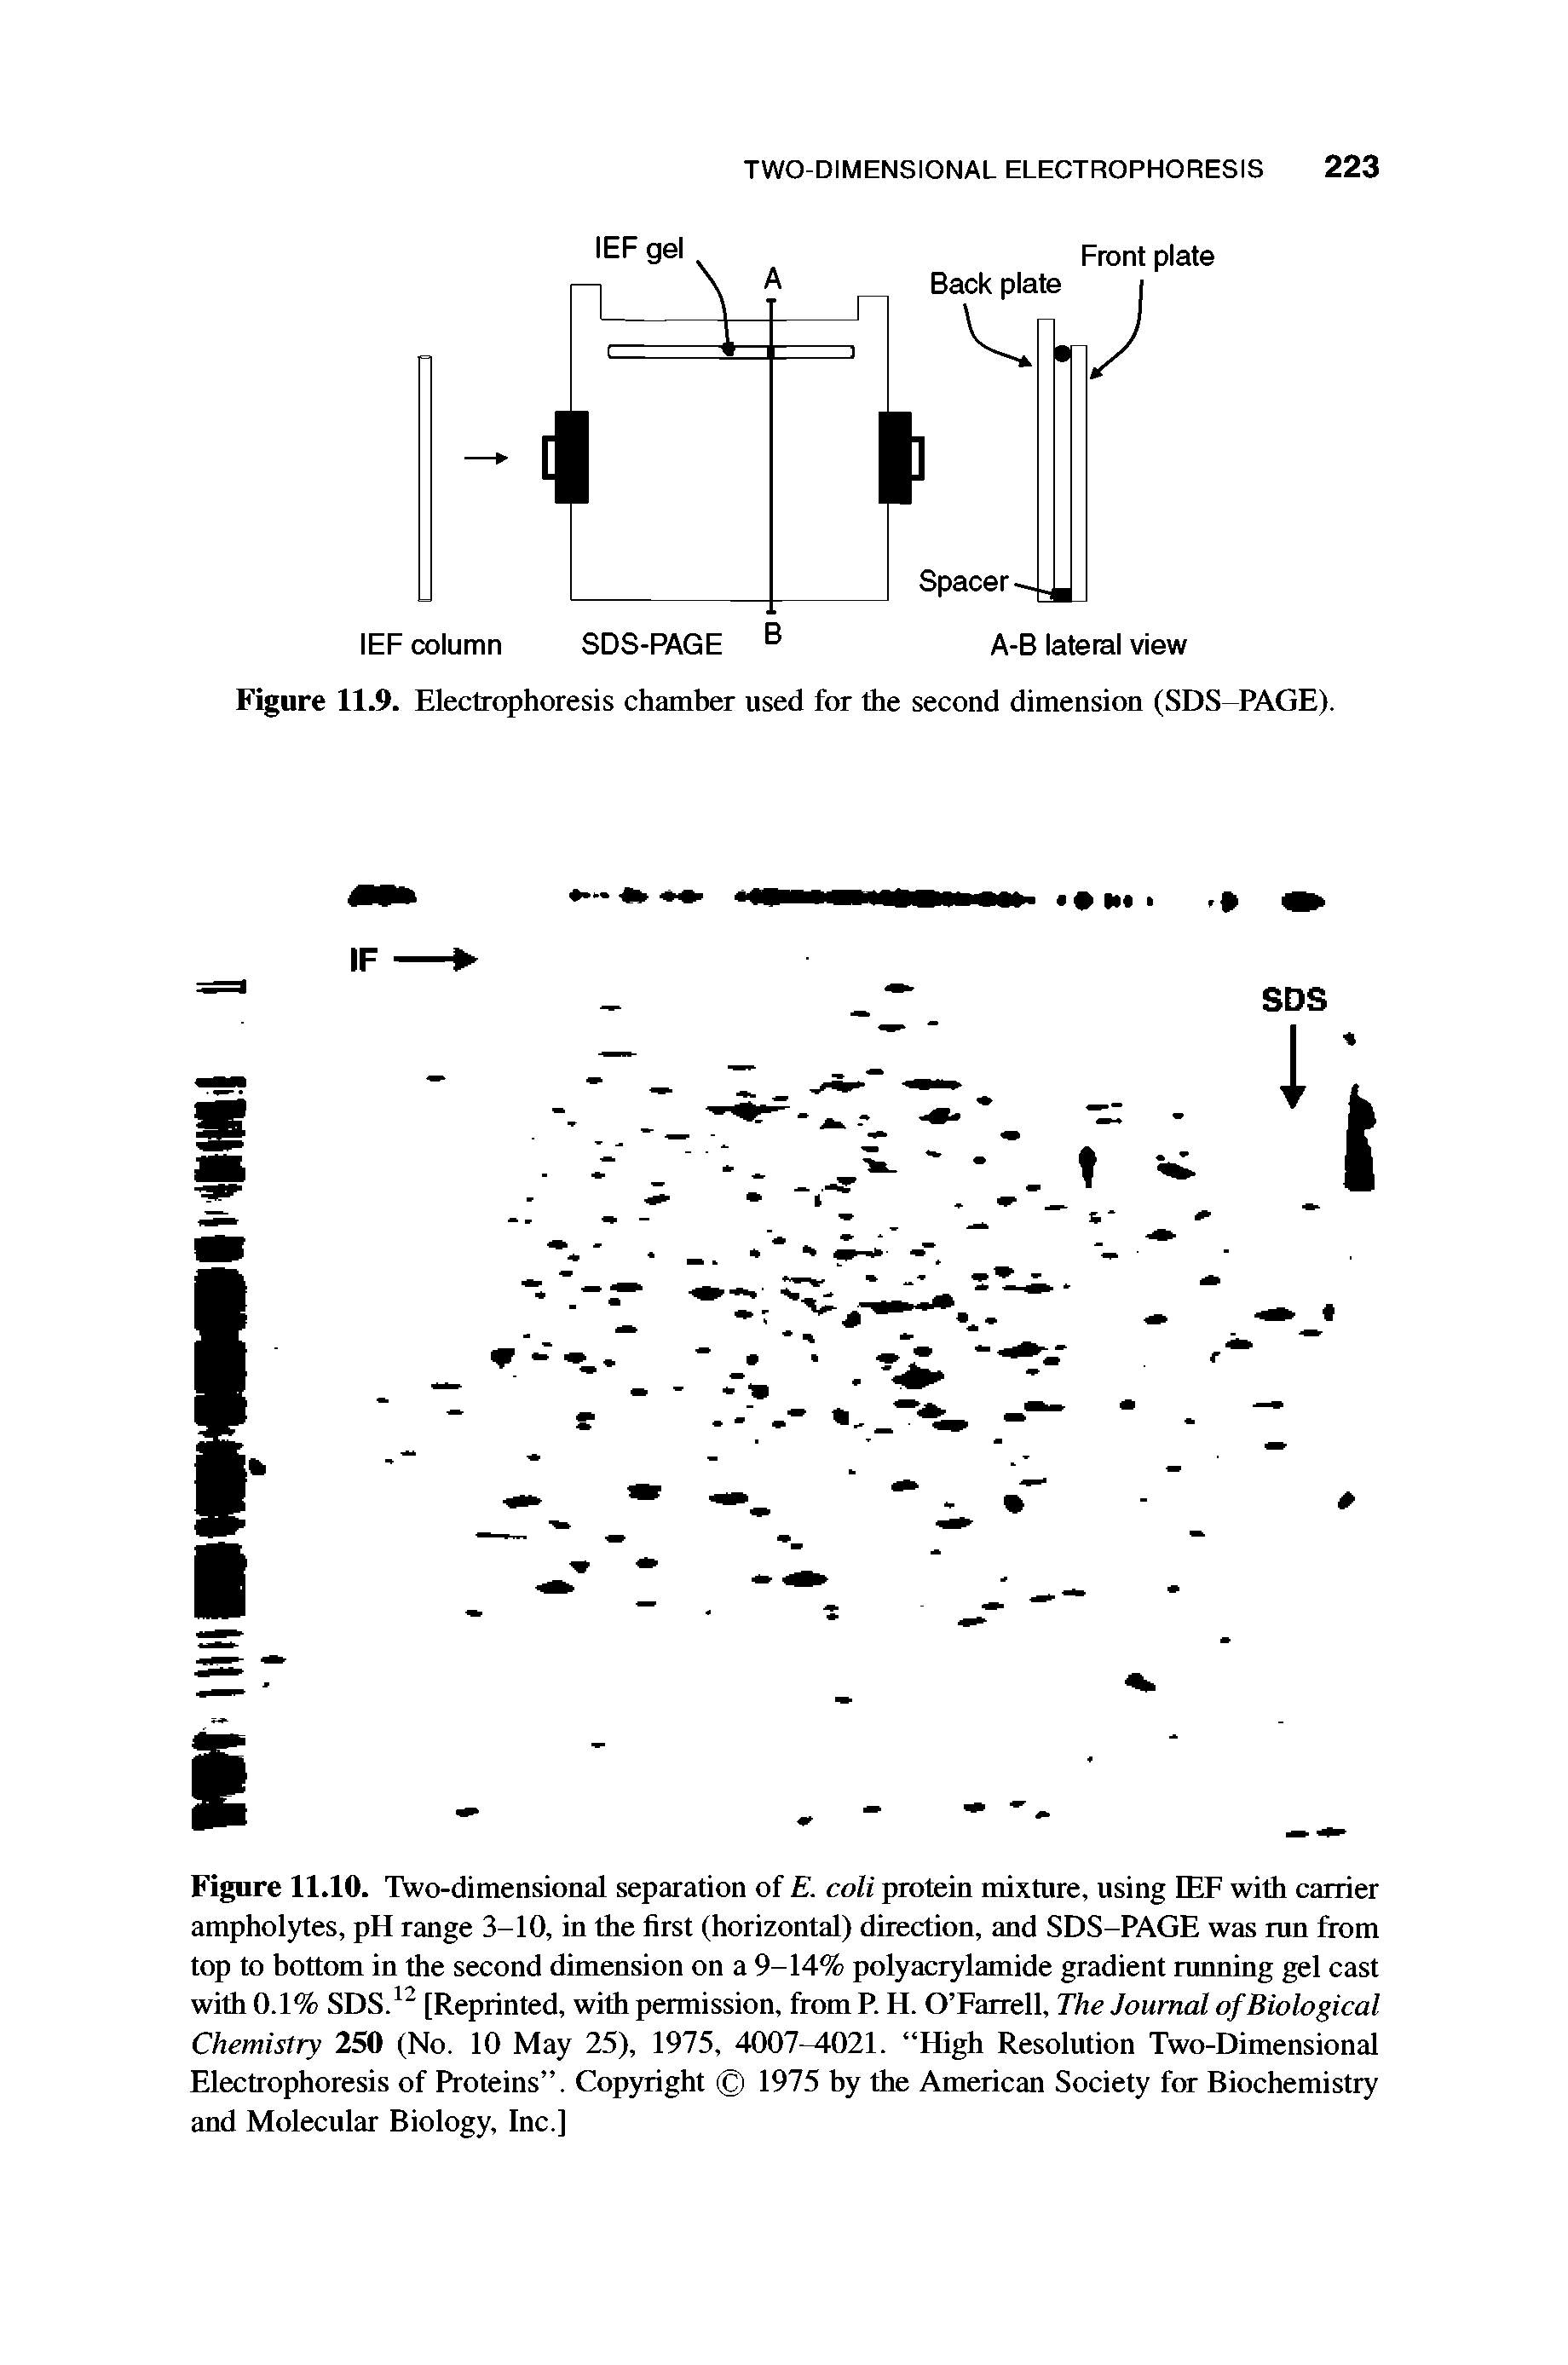 Figure 11.10. Two-dimensional separation of E. coli protein mixture, using IEF with carrier ampholytes, pH range 3-10, in the first (horizontal) direction, and SDS-PAGE was mn from top to bottom in the second dimension on a 9-14% polyacrylamide gradient running gel cast with 0.1% SDS.12 [Reprinted, with permission, from P. H. O Farrell, The Journal of Biological Chemistry 250 (No. 10 May 25), 1975, 4007 4021. High Resolution Two-Dimensional Electrophoresis of Proteins . Copyright 1975 by the American Society for Biochemistry and Molecular Biology, Inc.]...